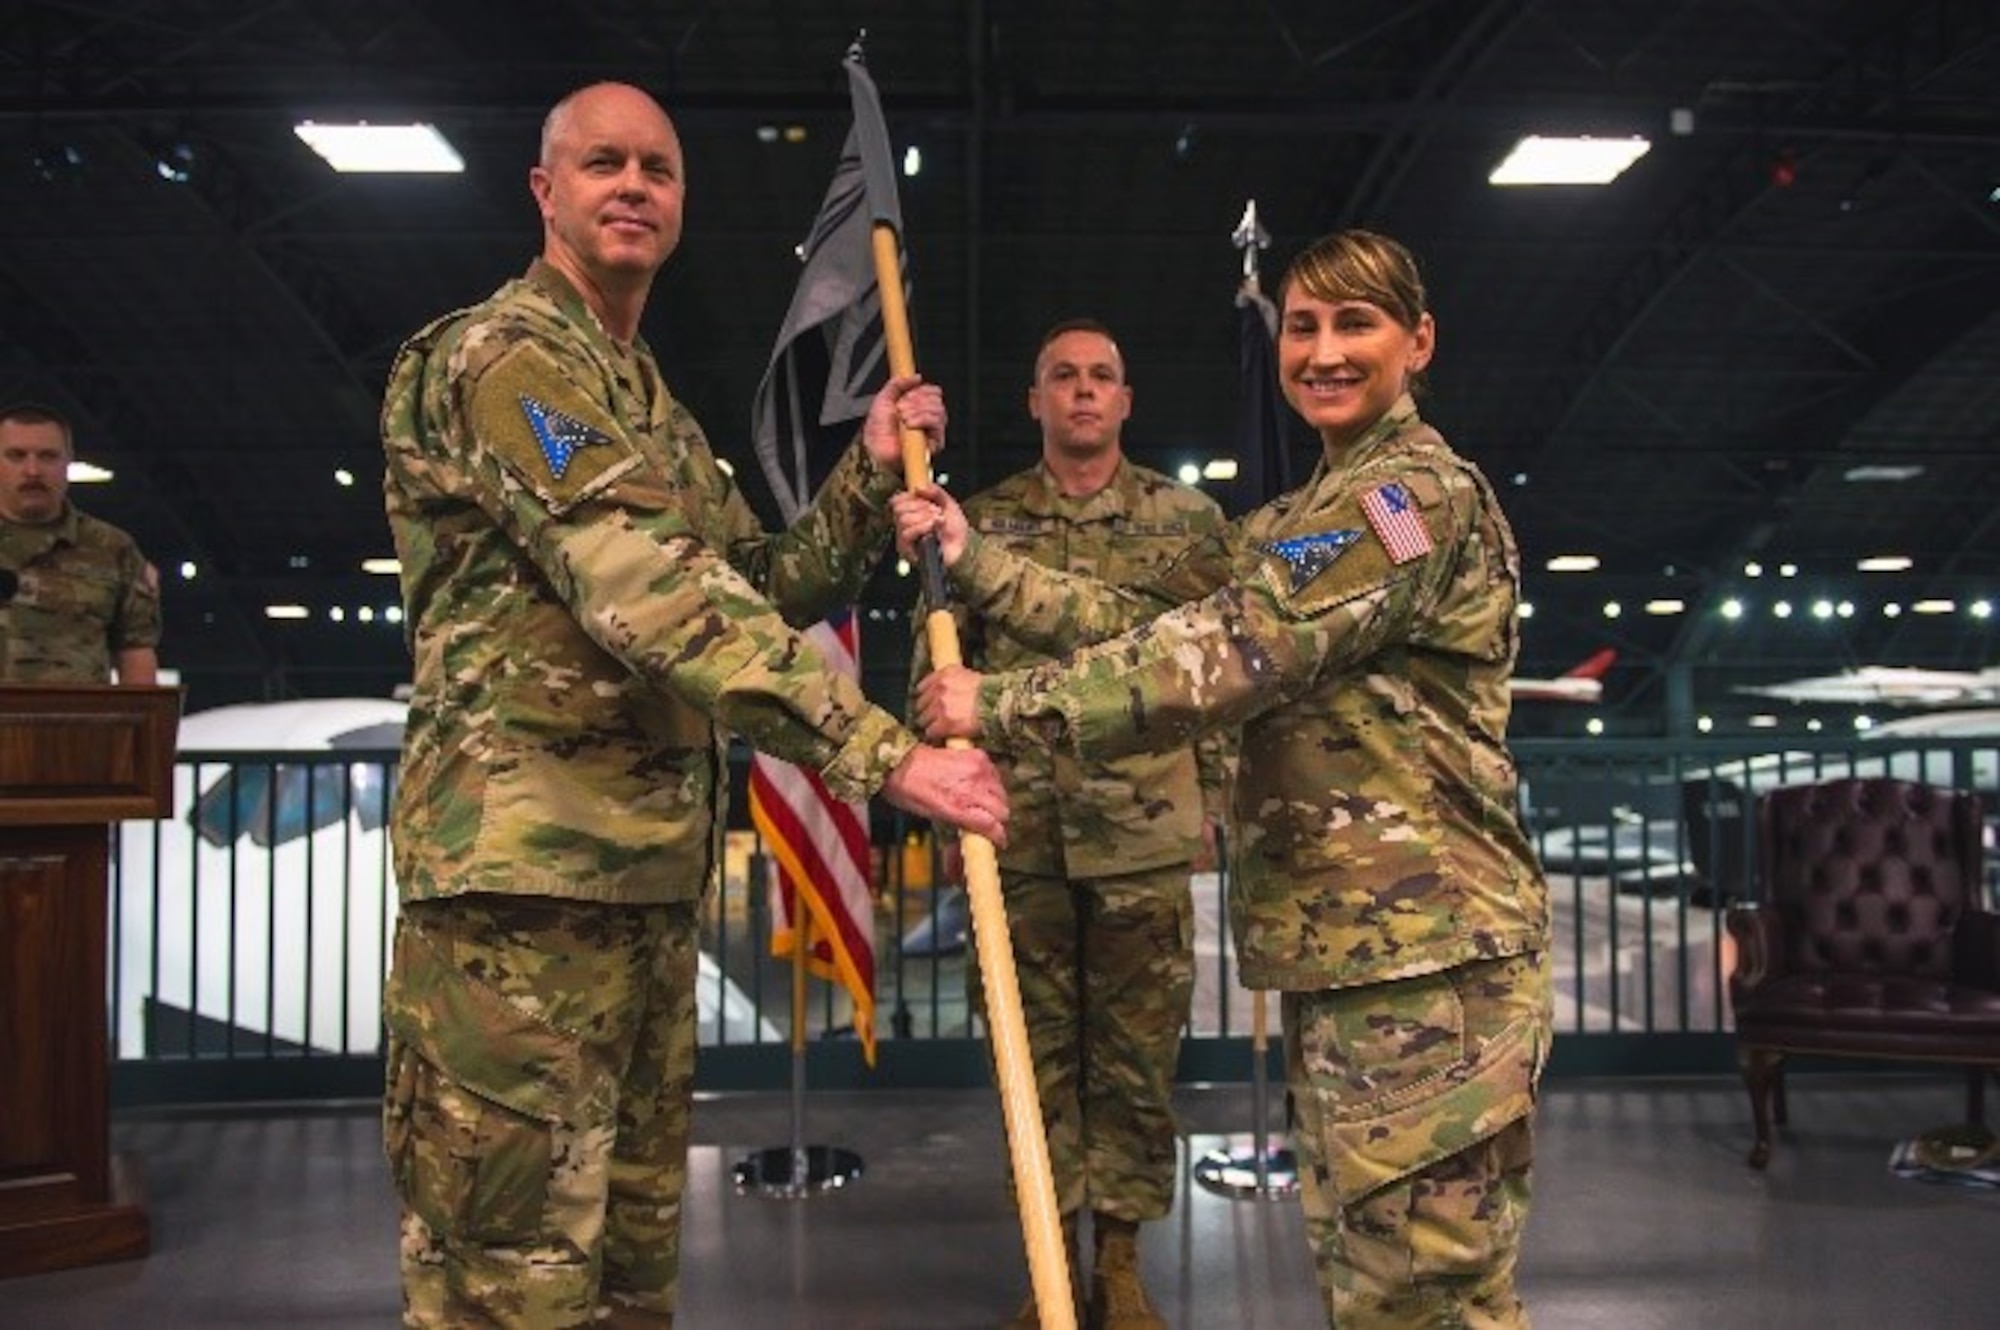 Military members pose for a photo during an activation ceremony.